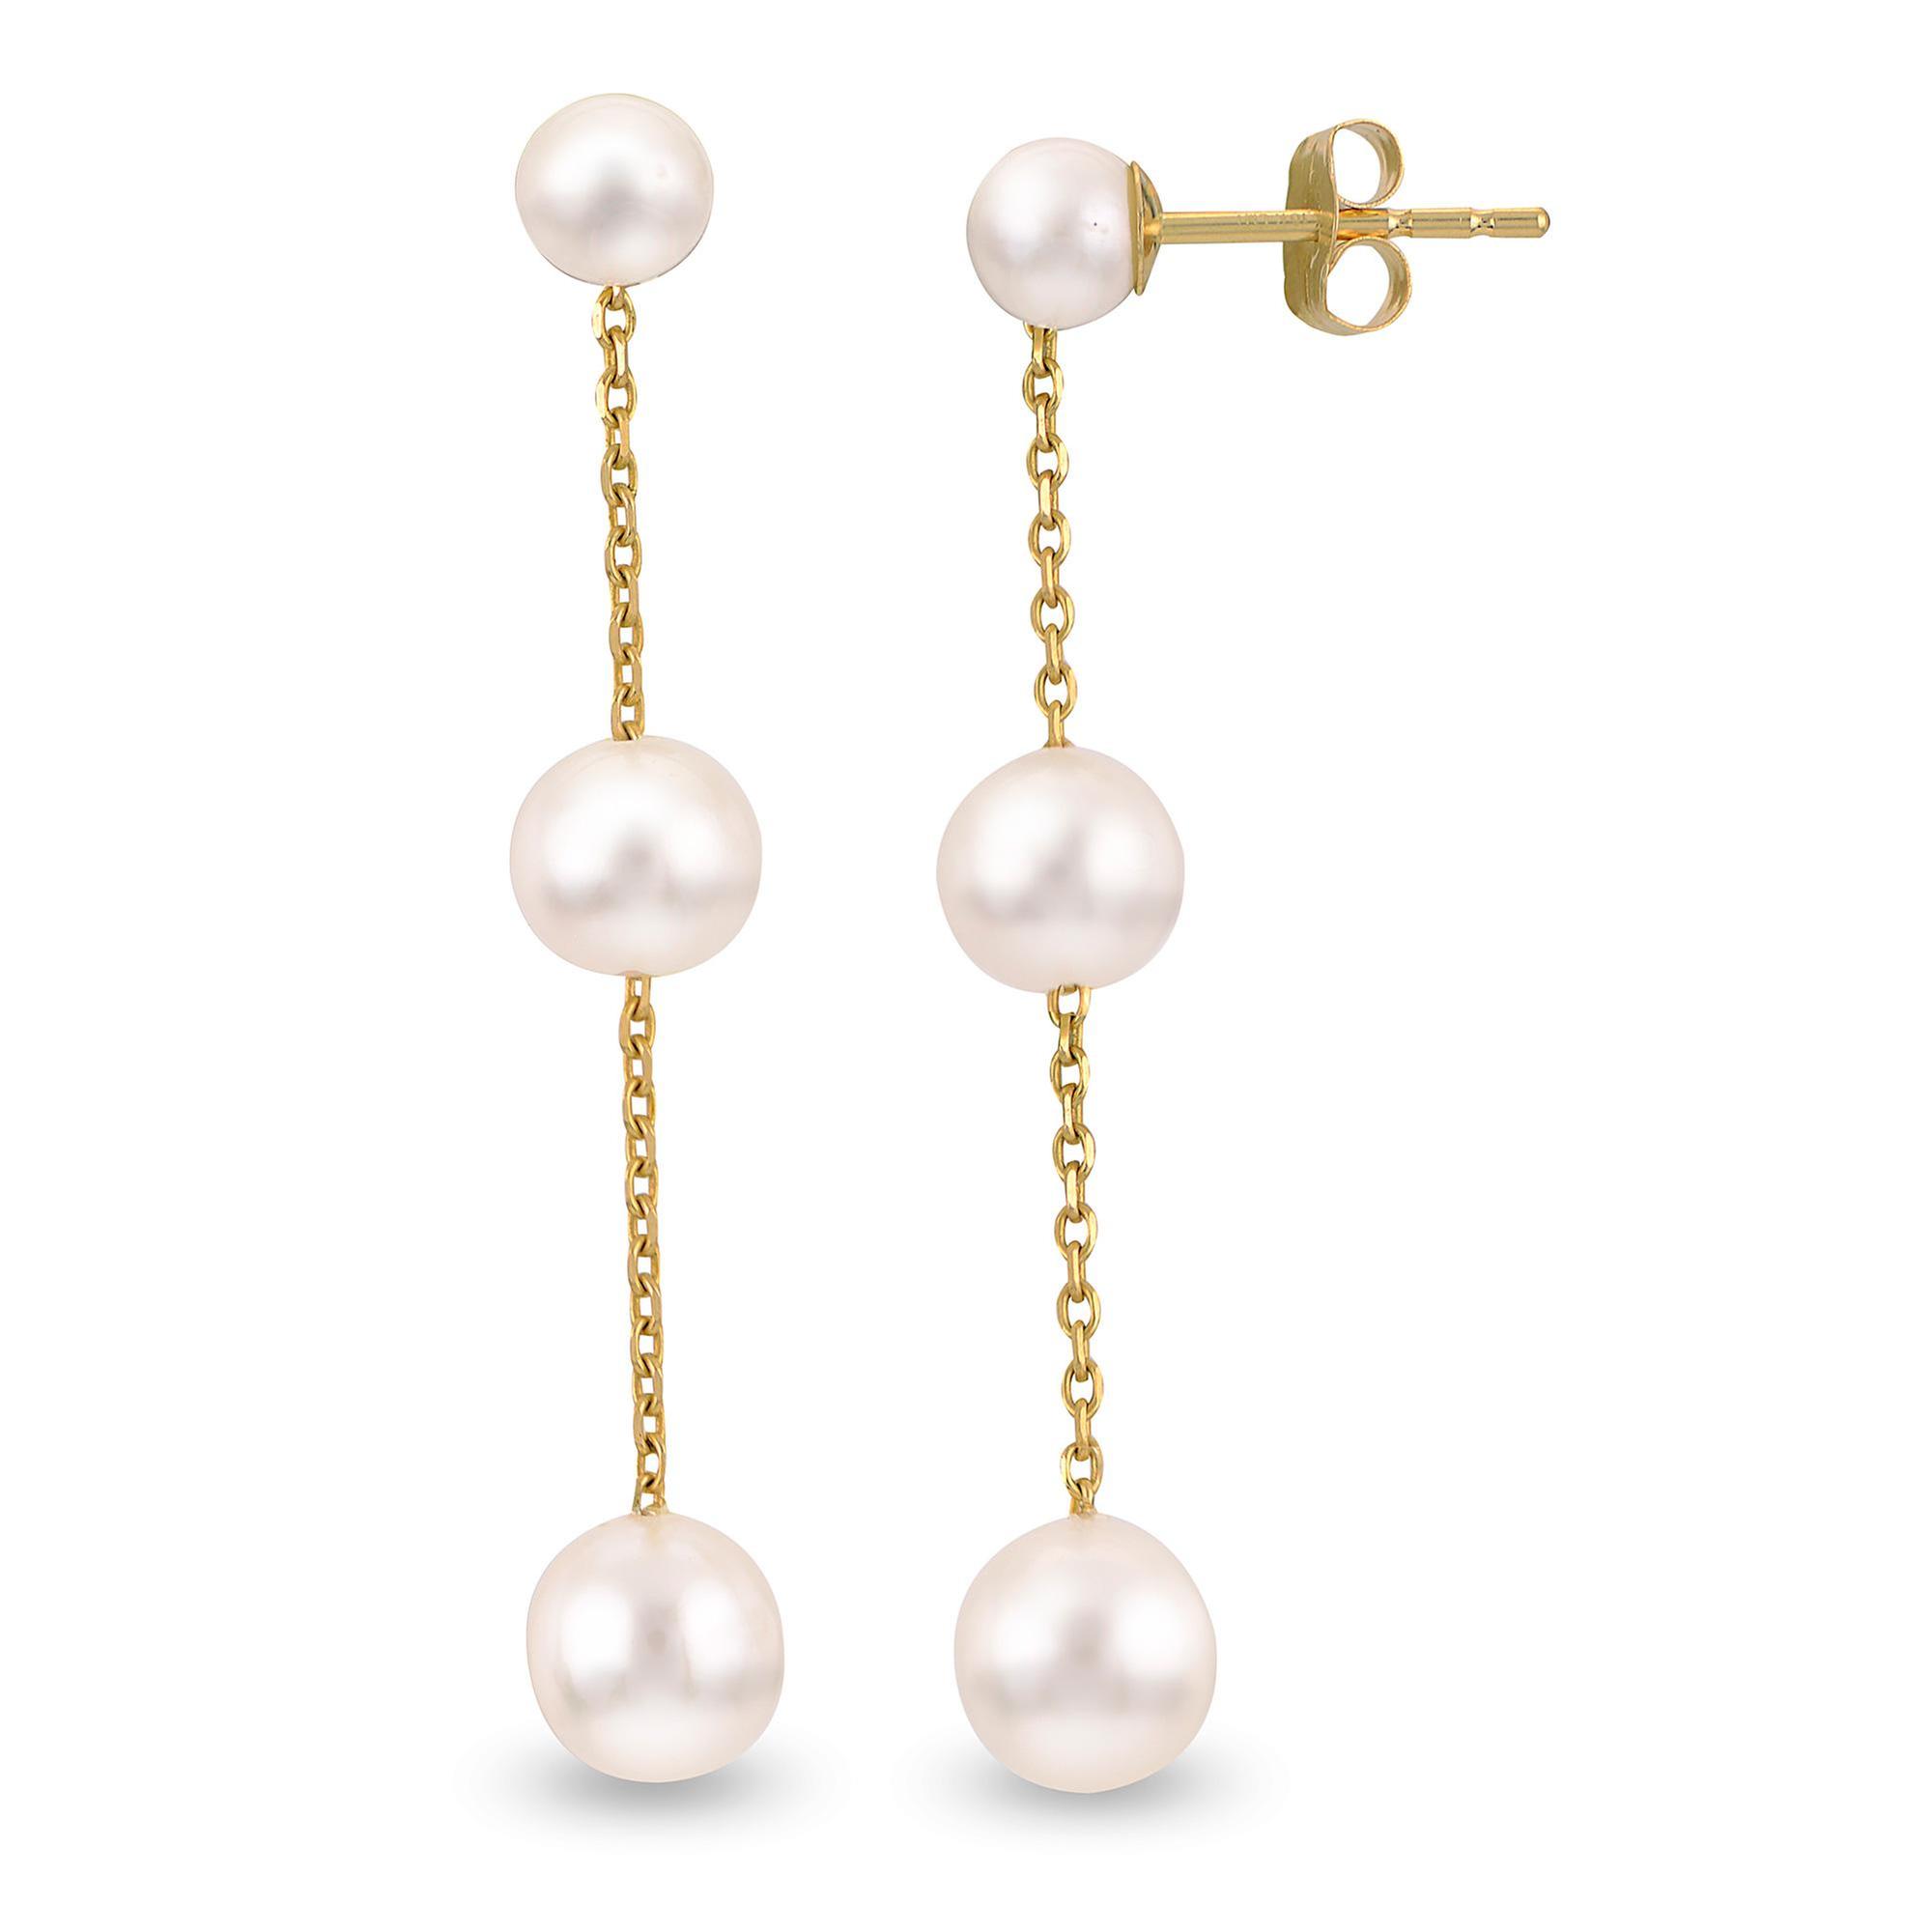 18Kt Yellow Gold Dangle cultivated pearl with Gold Beads Charm Length 26mm with bail/7mm Bottom cultivated pearl 